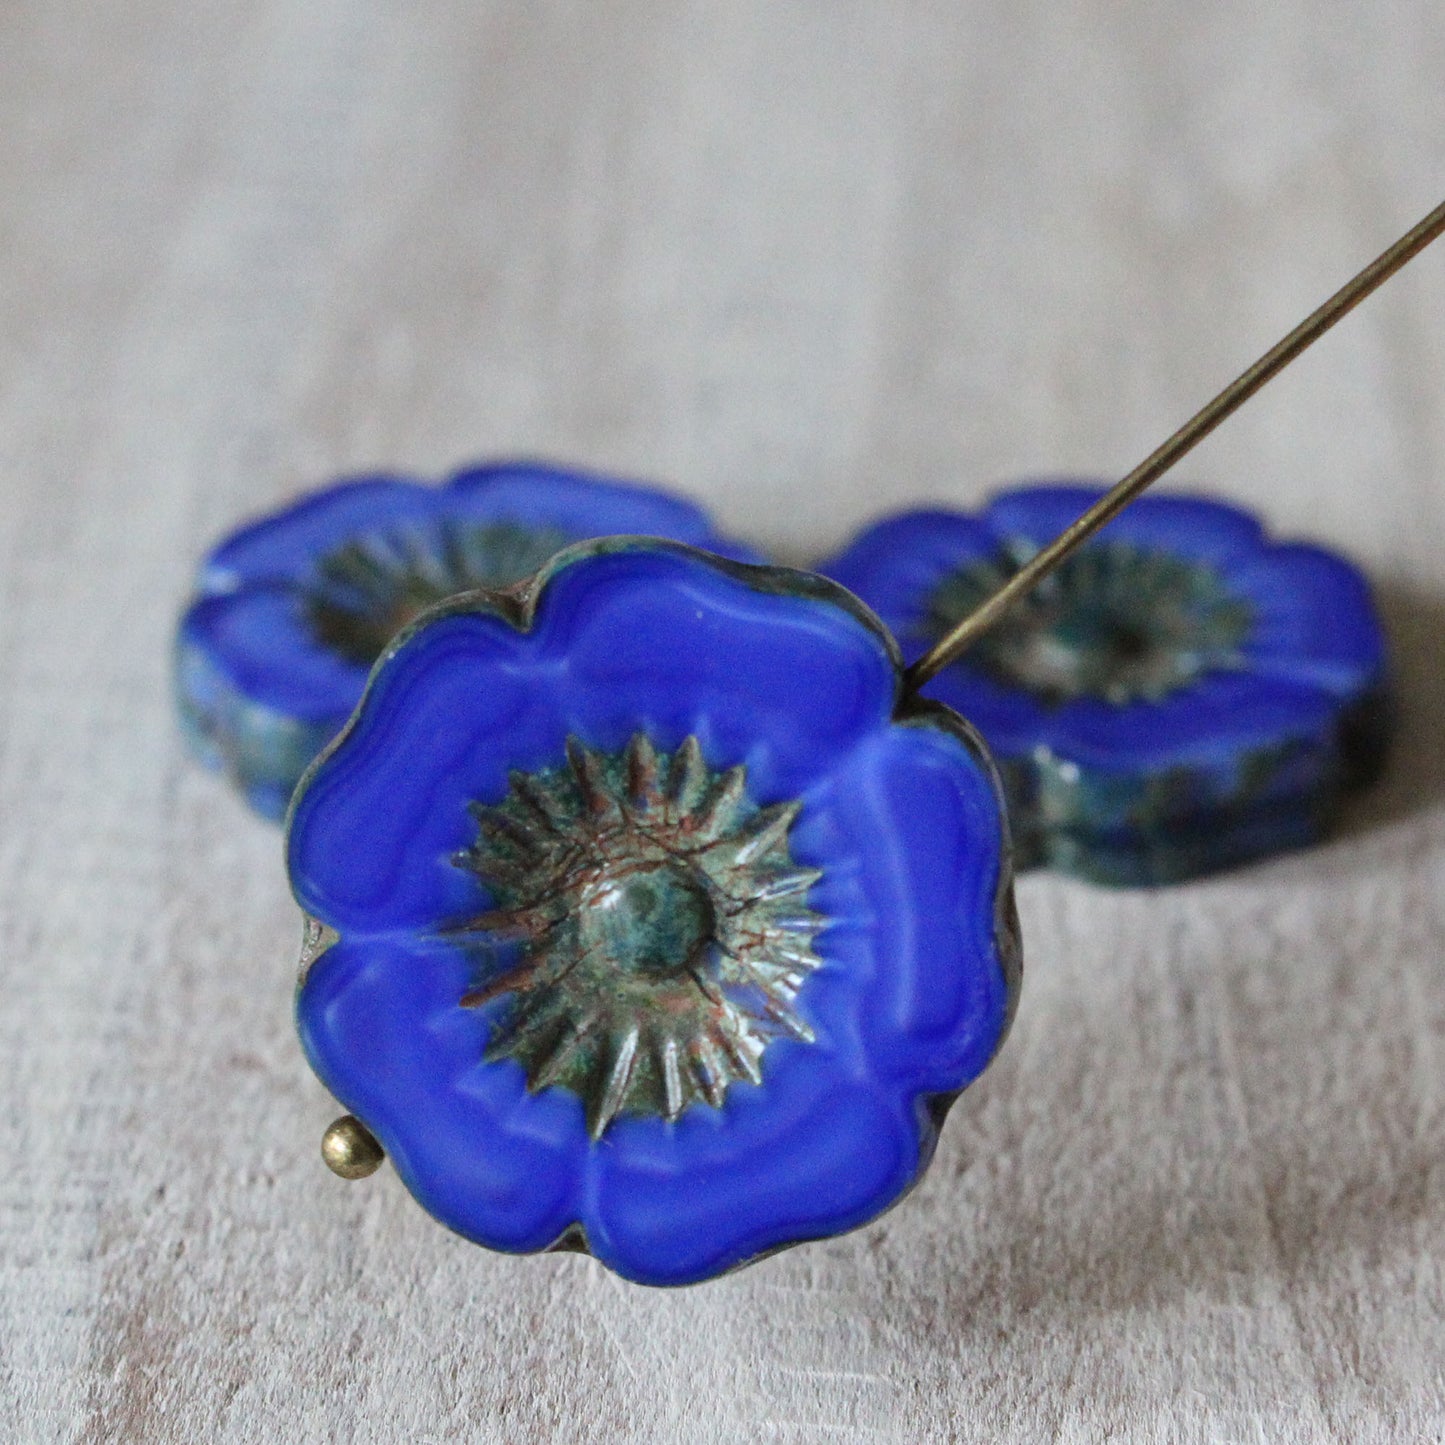 22mm Hibiscus Flower Beads - Royal Blue with Picasso Finish - Choose Amount